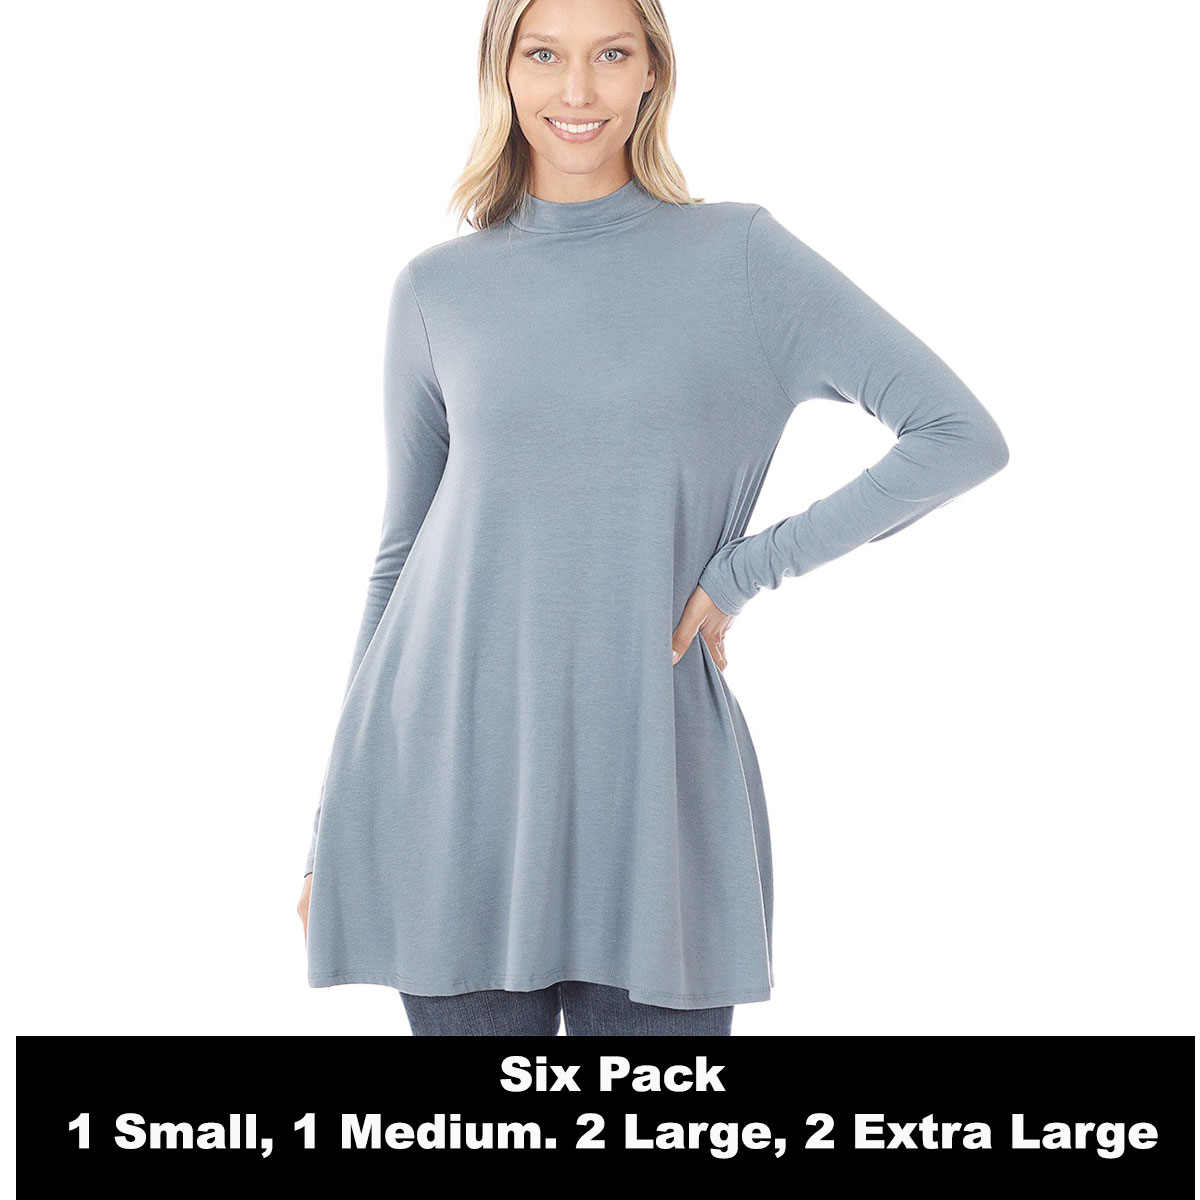  CEMENT SIX PACK Mock Turtleneck - Long Sleeve with Pockets 1641 (1S/1M/2L/2XL)/